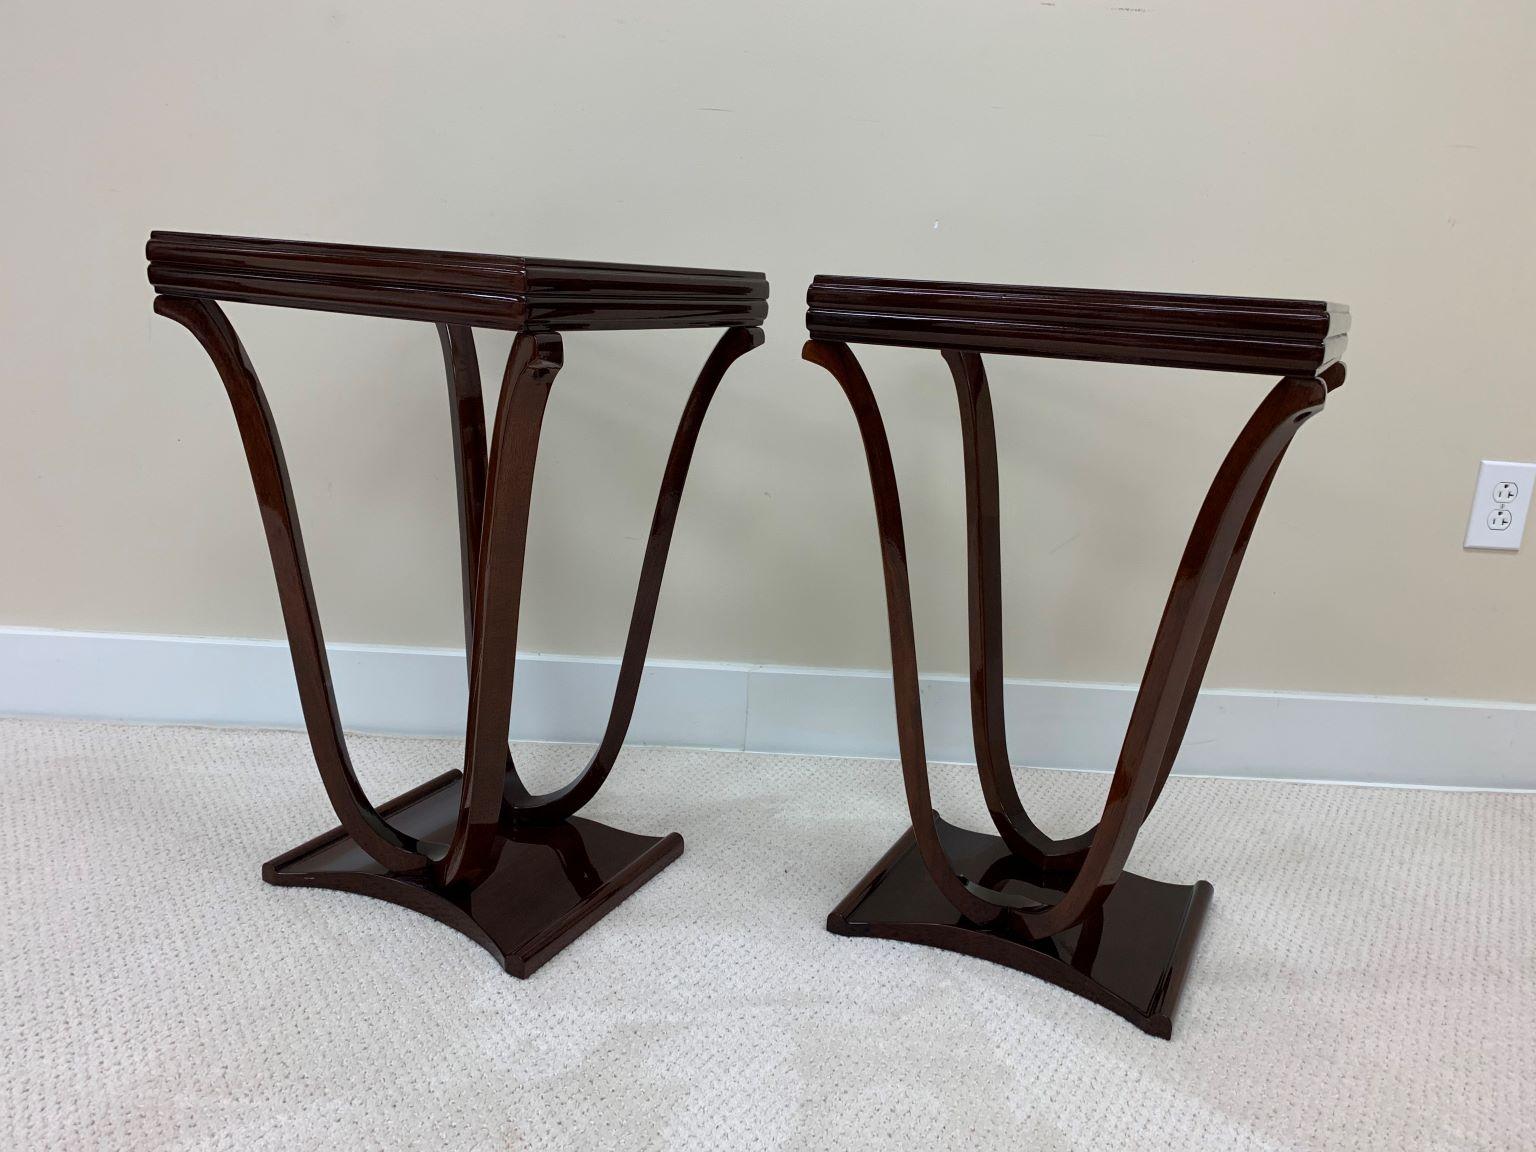 Pair of Art Deco tulip shaped glass top end tables. A new glass top with a frosted edge highlights the elegant curving legs of this beautiful American Art Deco  table. from the 1930's. The solid maple wood is expertly restored in a walnut gloss